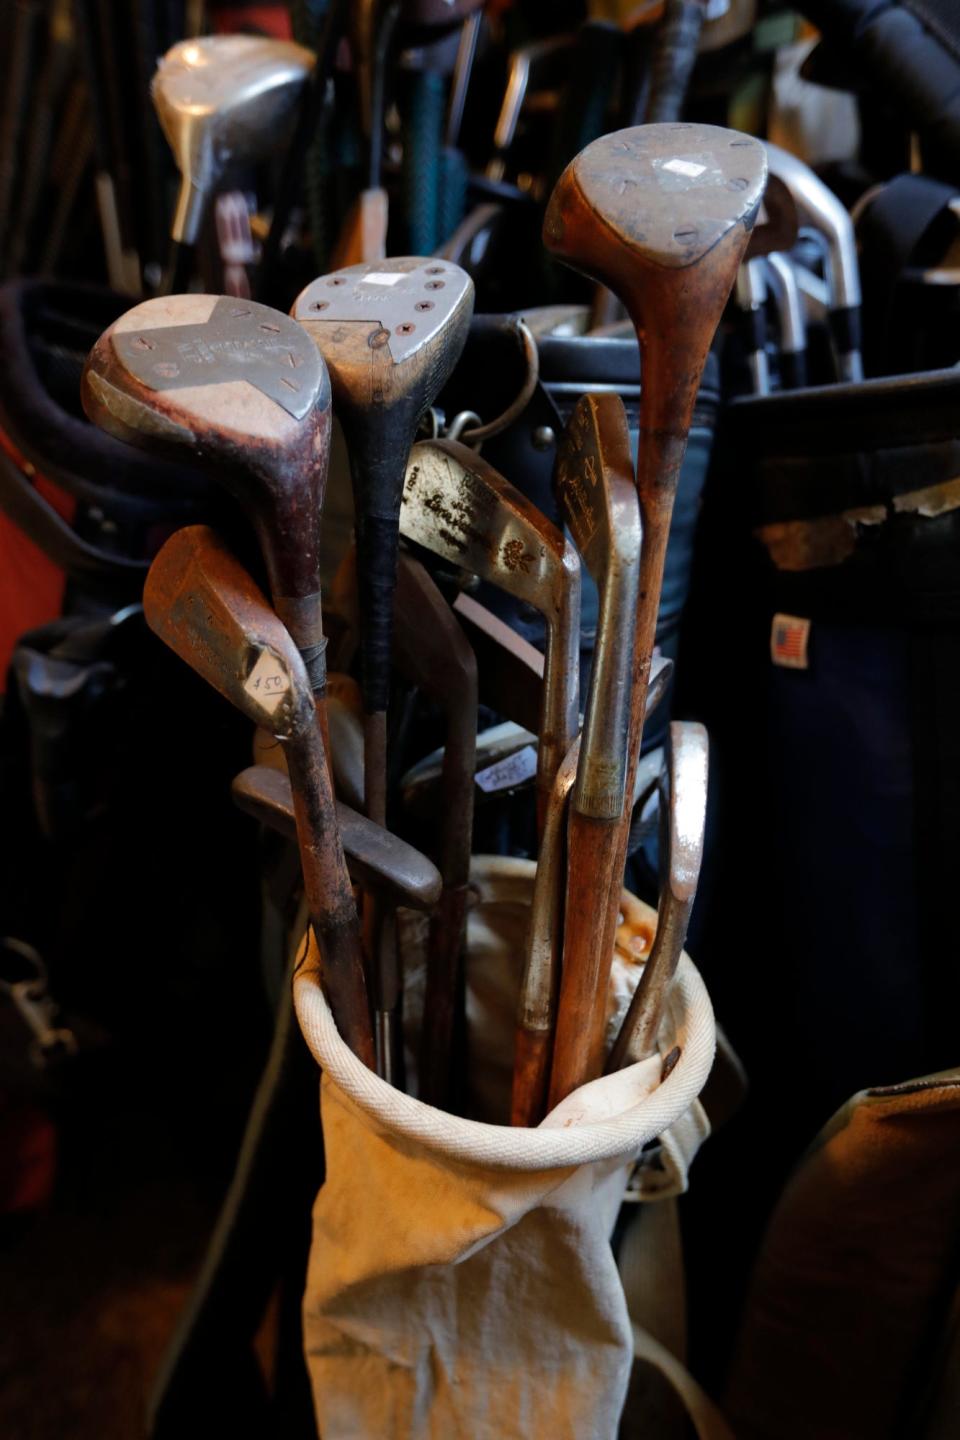 Taking advantage of an interest in classic collectibles, John Berg picked up dozens of wood clubs as well as 1,200 wedges and irons from the 1960s, which he sold either off his front porch or on trips to San Diego.